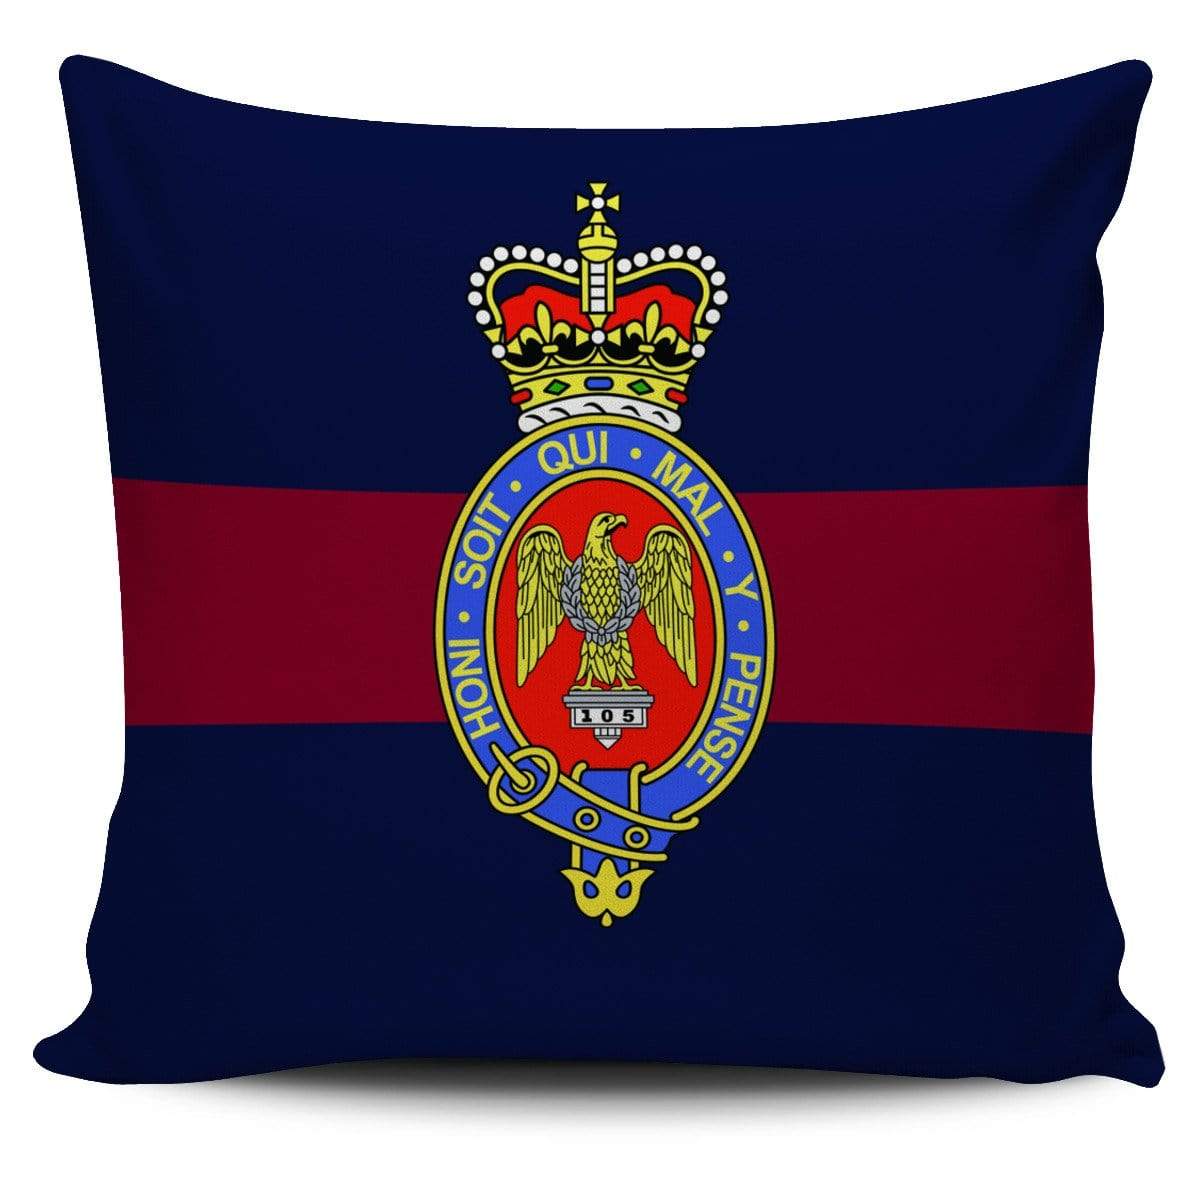 cushion cover Blues And Royals Cushion Cover